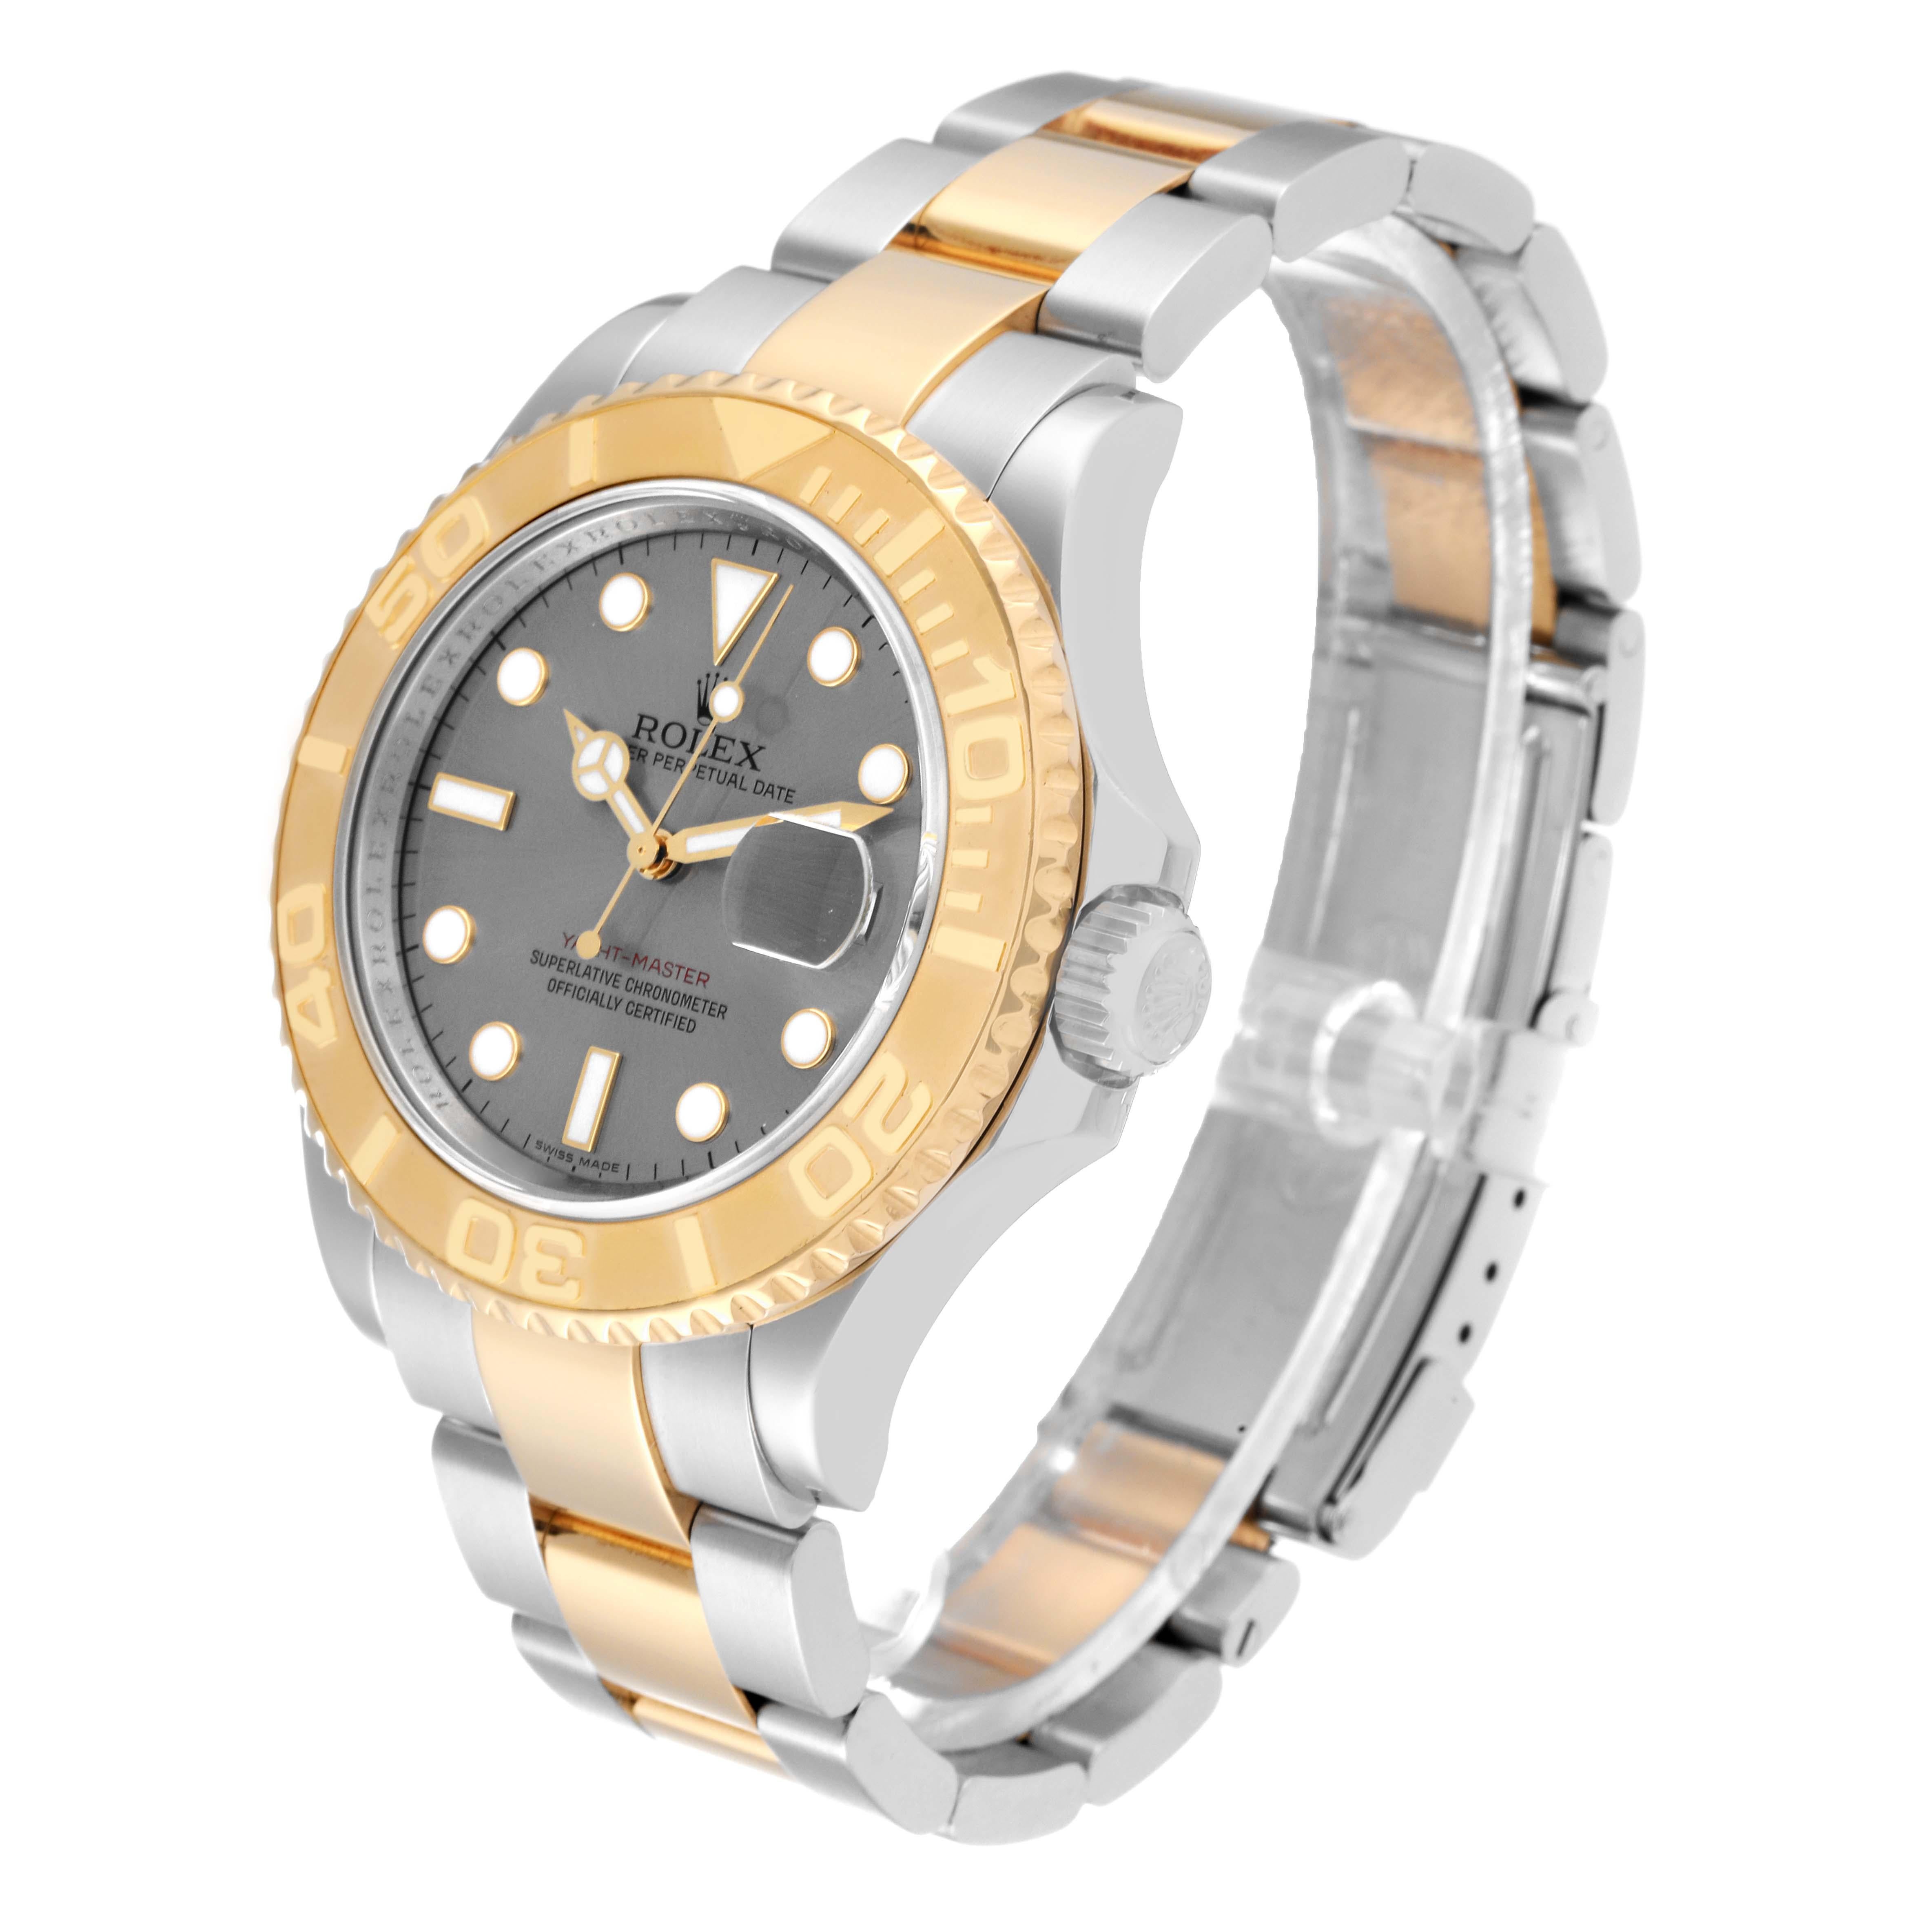 Men's Rolex Yachtmaster Steel Yellow Gold Slate Dial Mens Watch 16623 Box Card For Sale